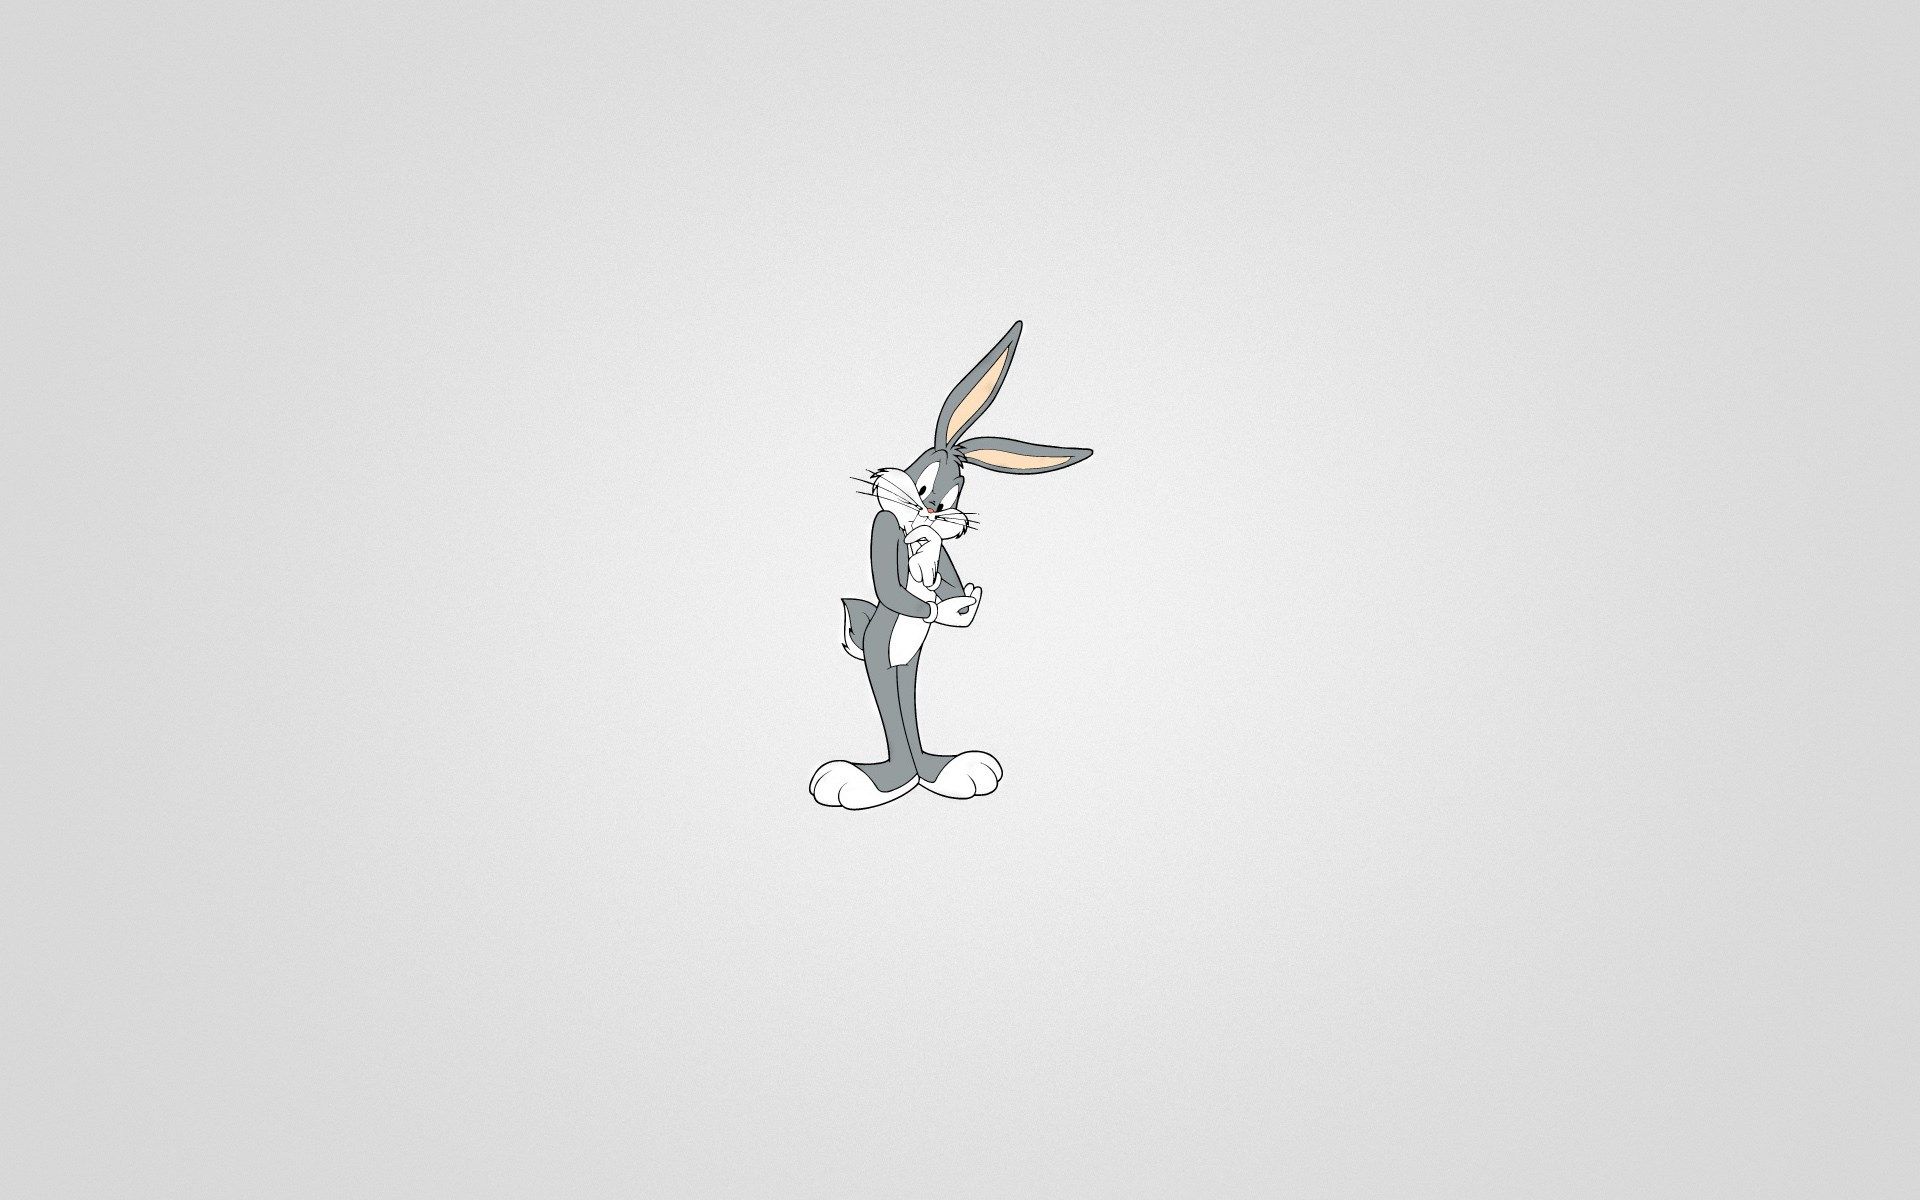 Bugs bunny, grey background, white background, standing, one hand on the hips - Looney Tunes, Bugs Bunny